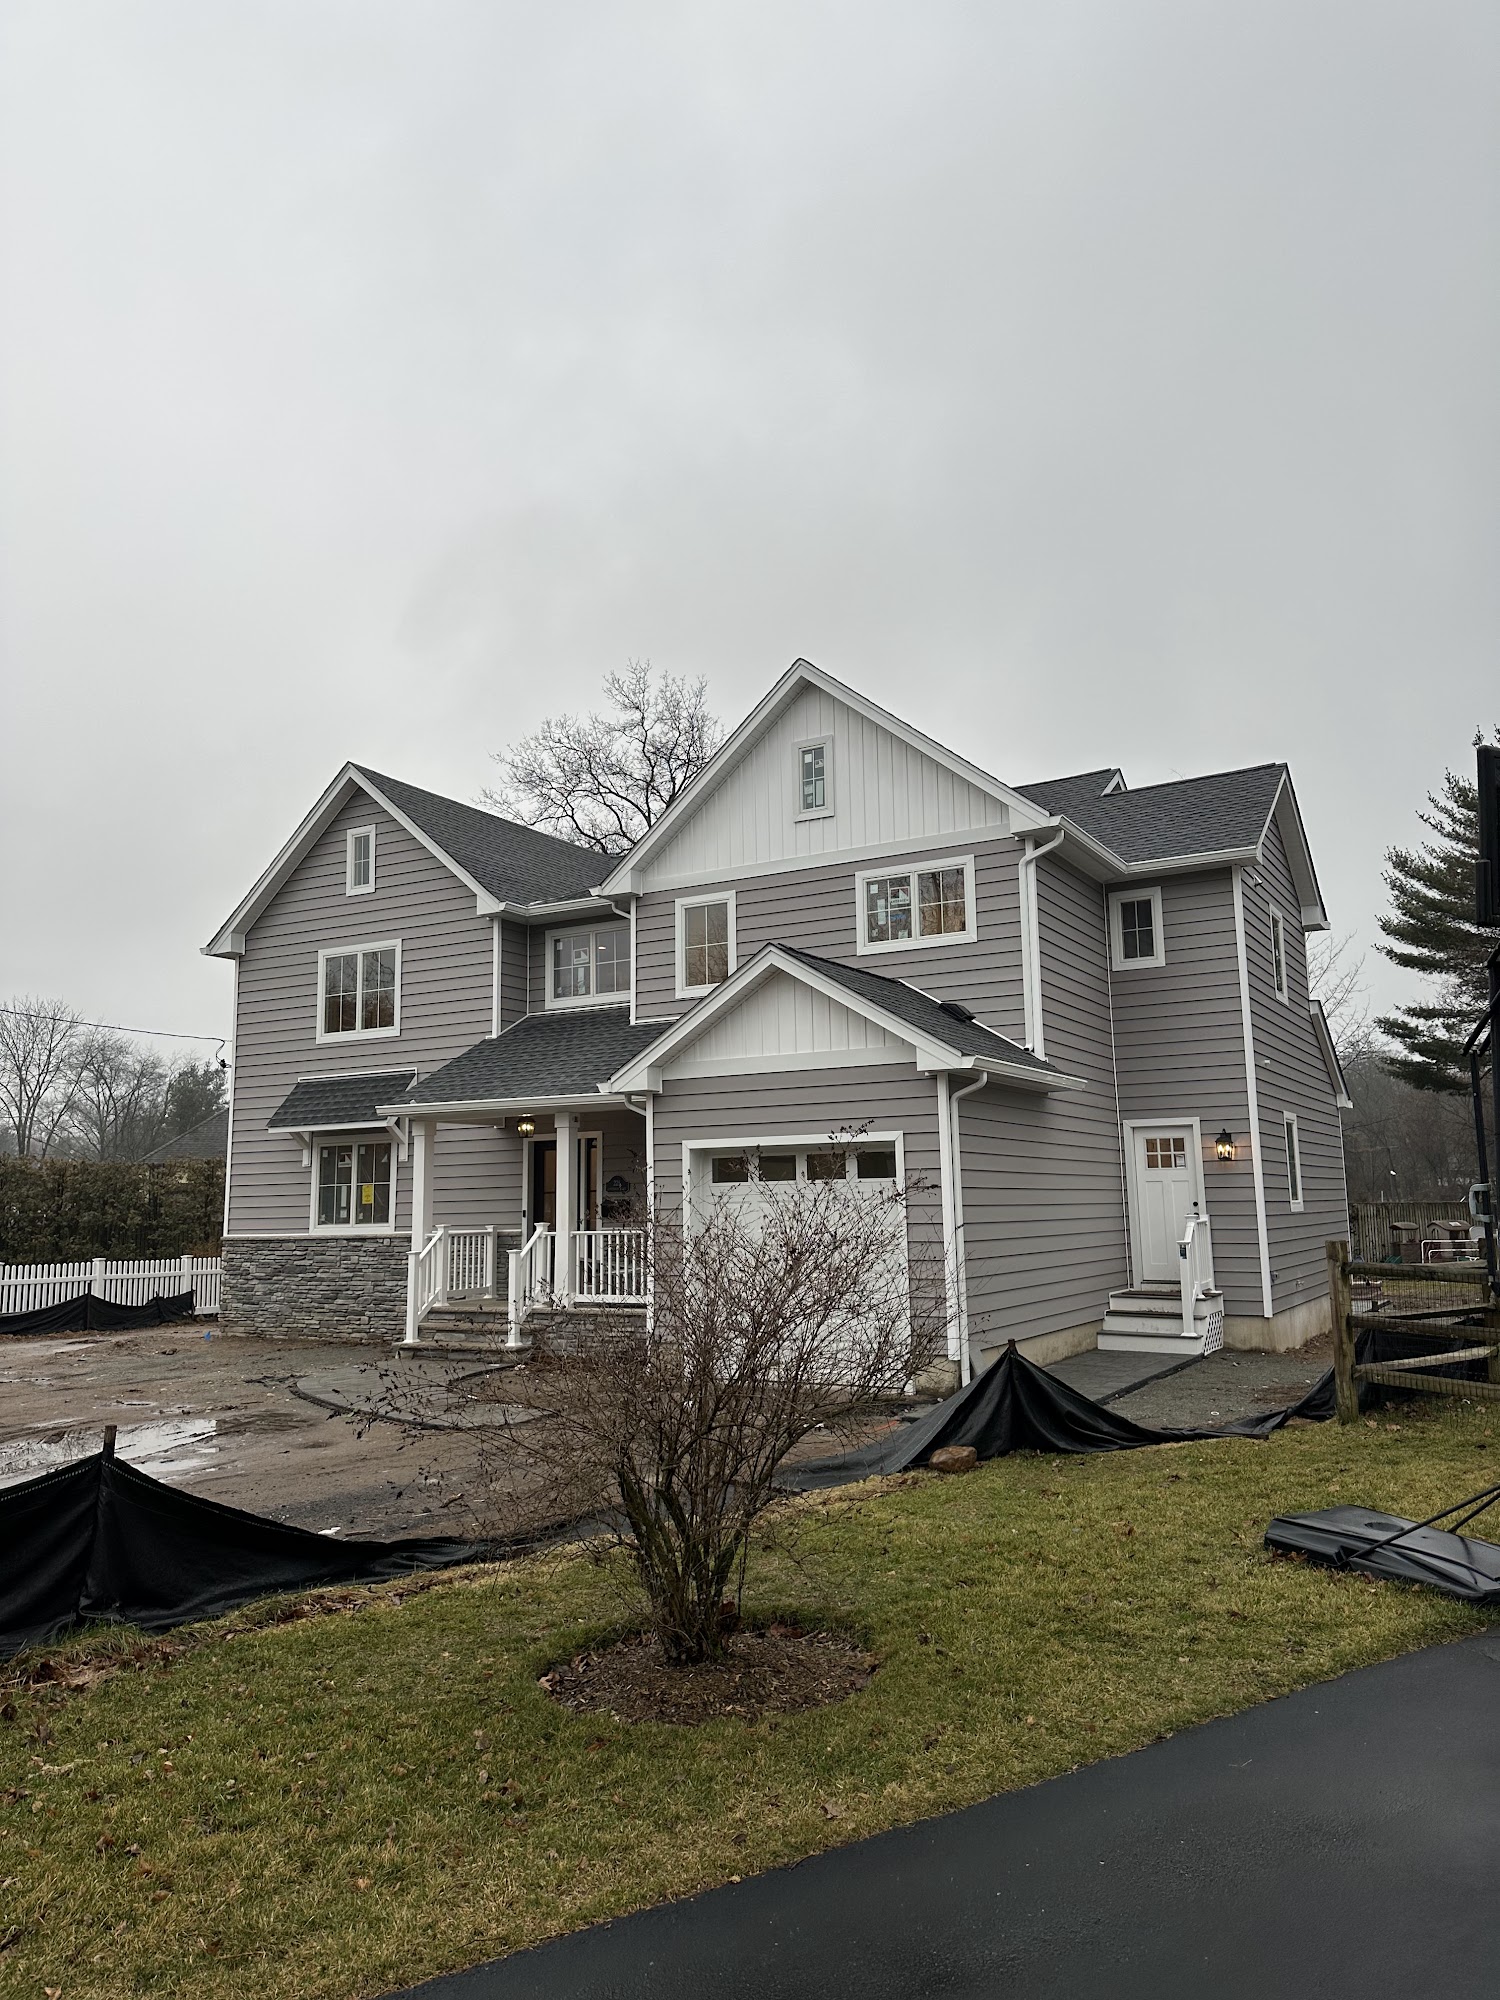 The HOME SOURCE CONSTRUCTION 219 W Madison Ave, Dumont New Jersey 07628